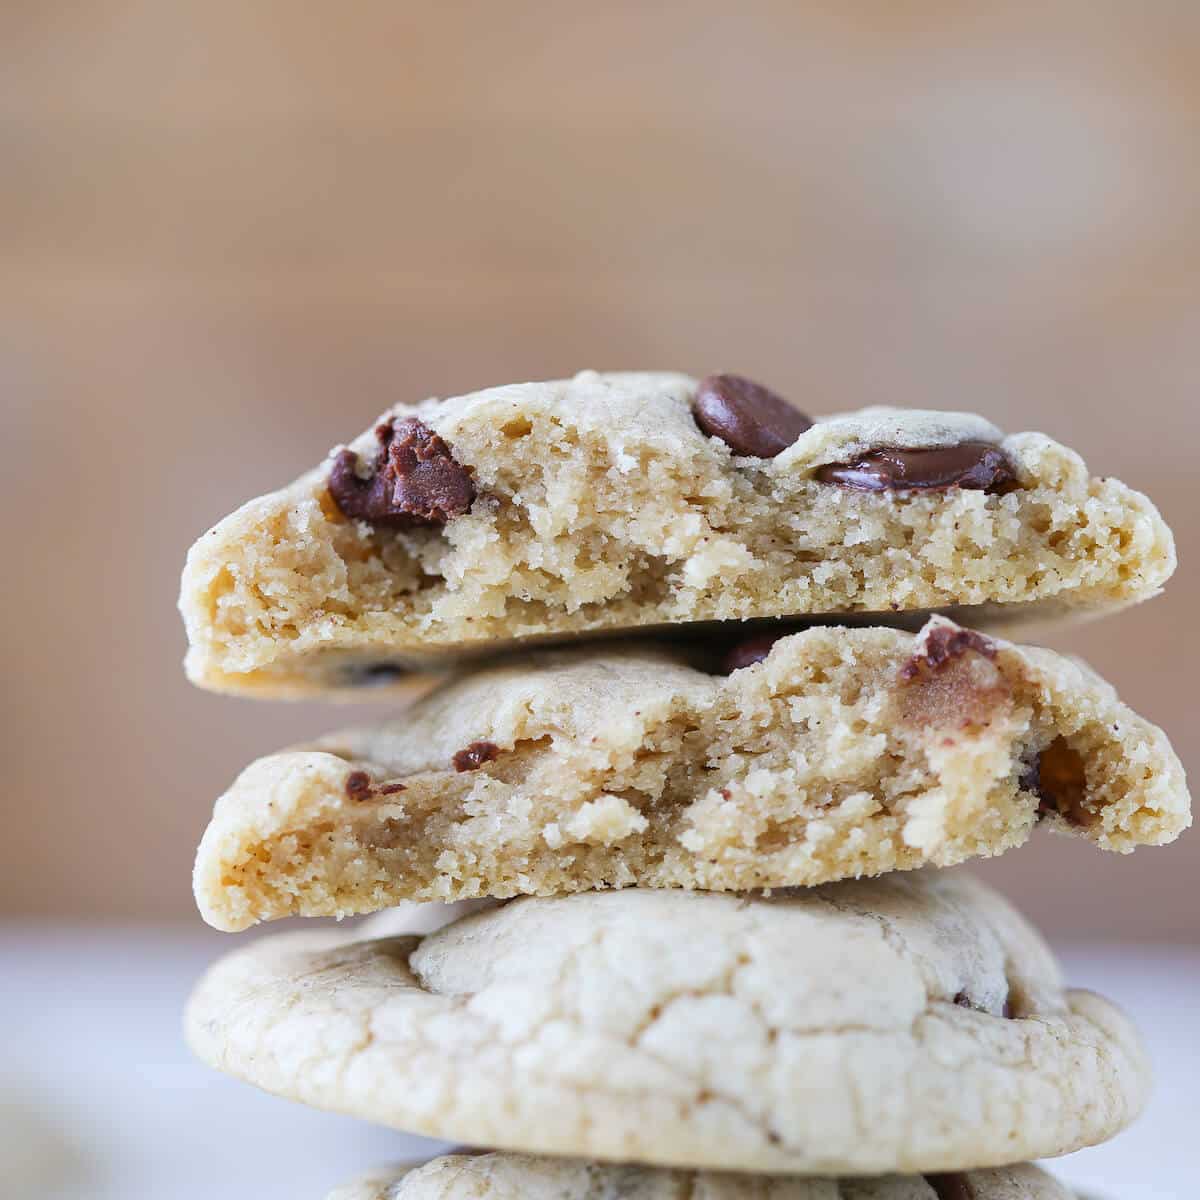 Brown Butter Cream Cheese Chocolate Chip Cookies interior.